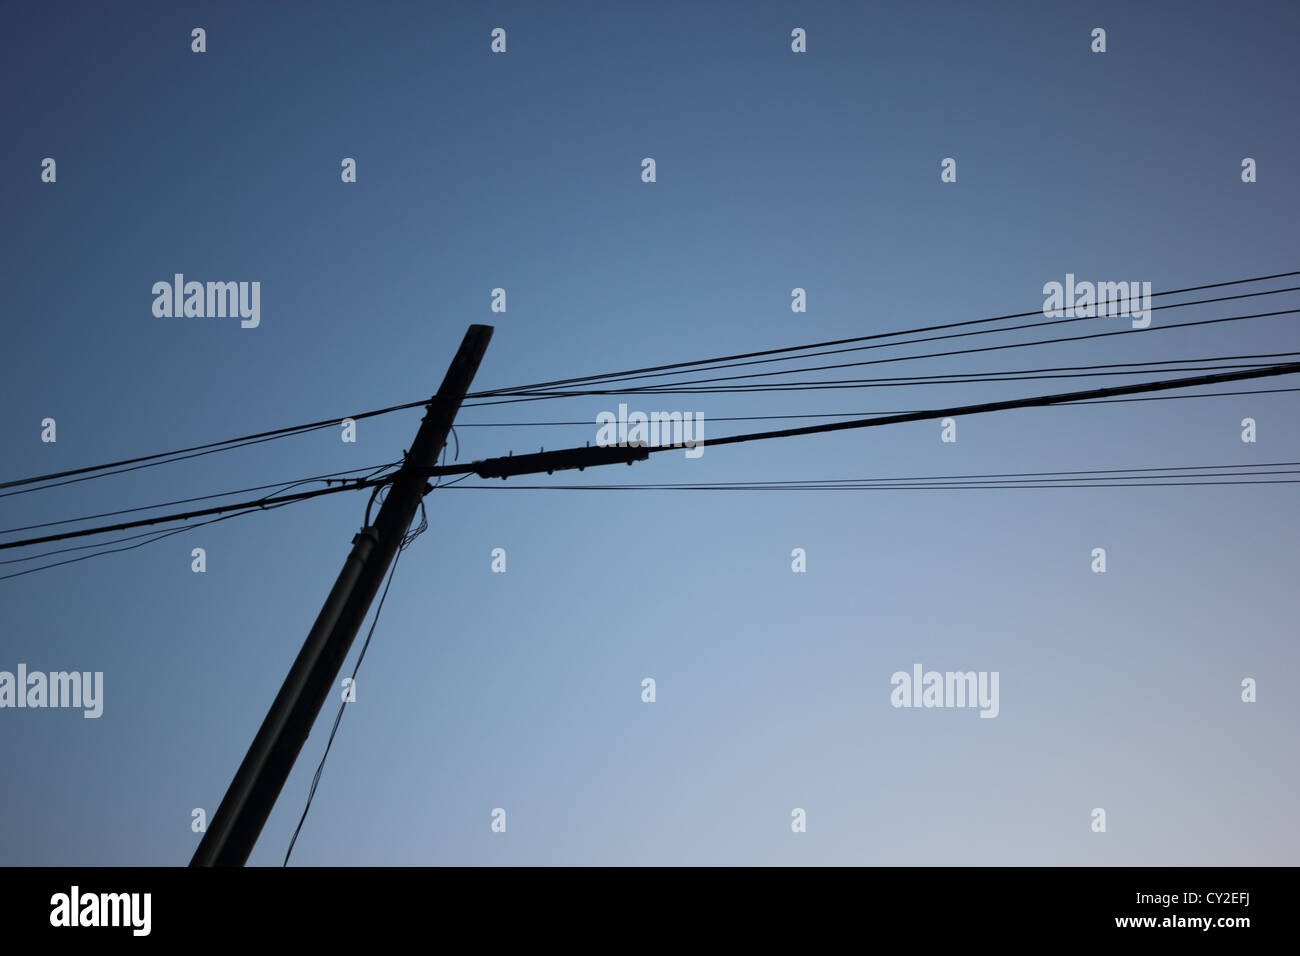 telephone pole with wires against a clear blue sky, electricity, communications, simple, clear, photoarkive Stock Photo